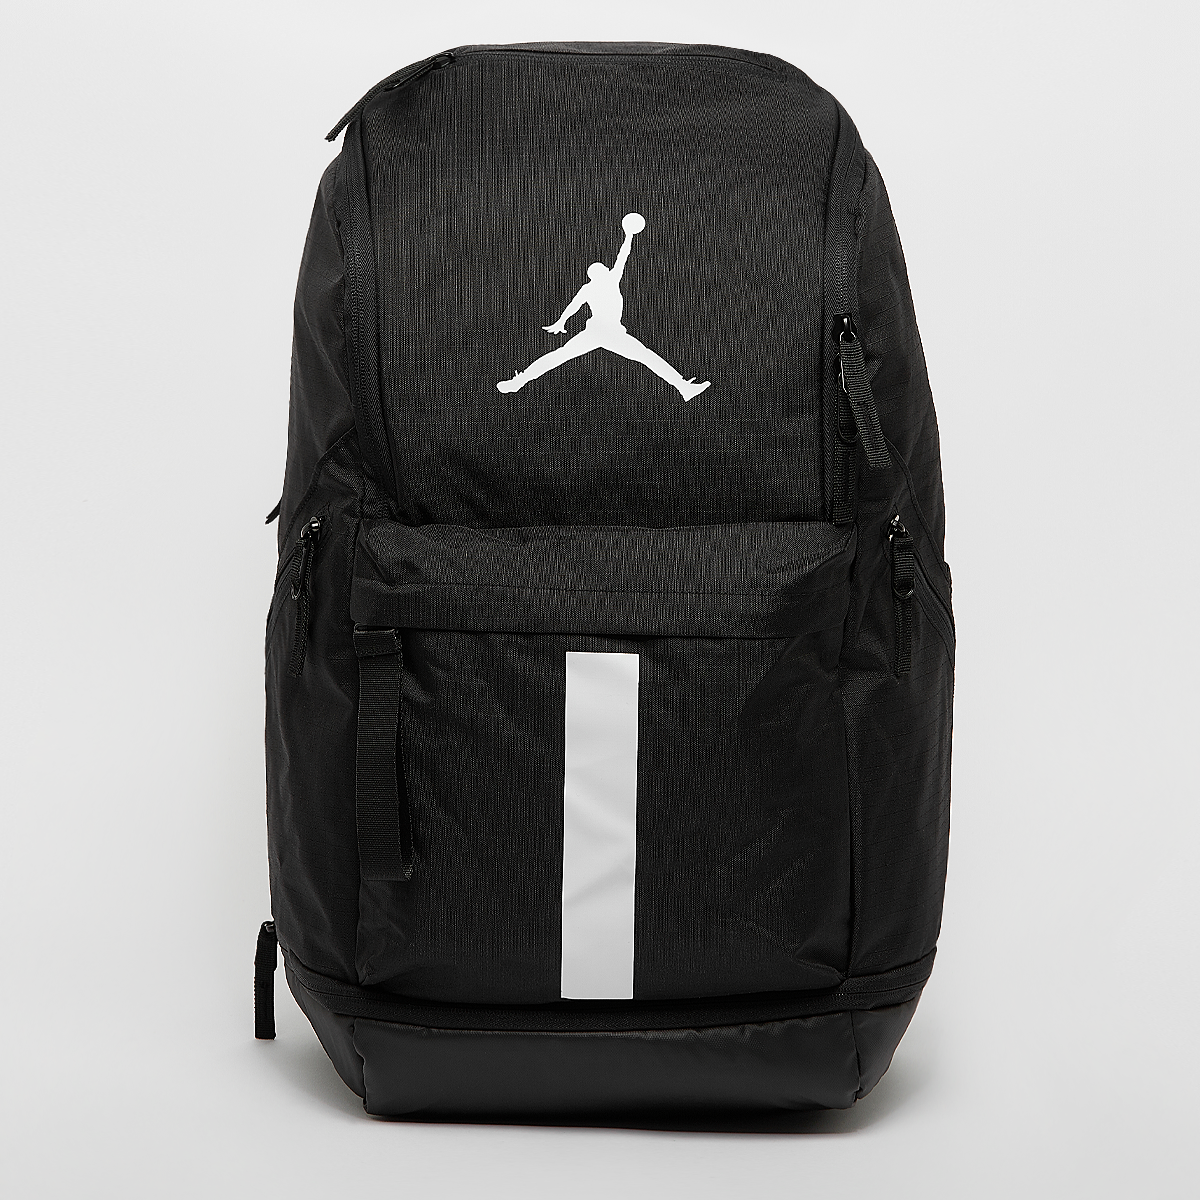 Velocity Backpack, JORDAN, Bags, black/white, taille: one size